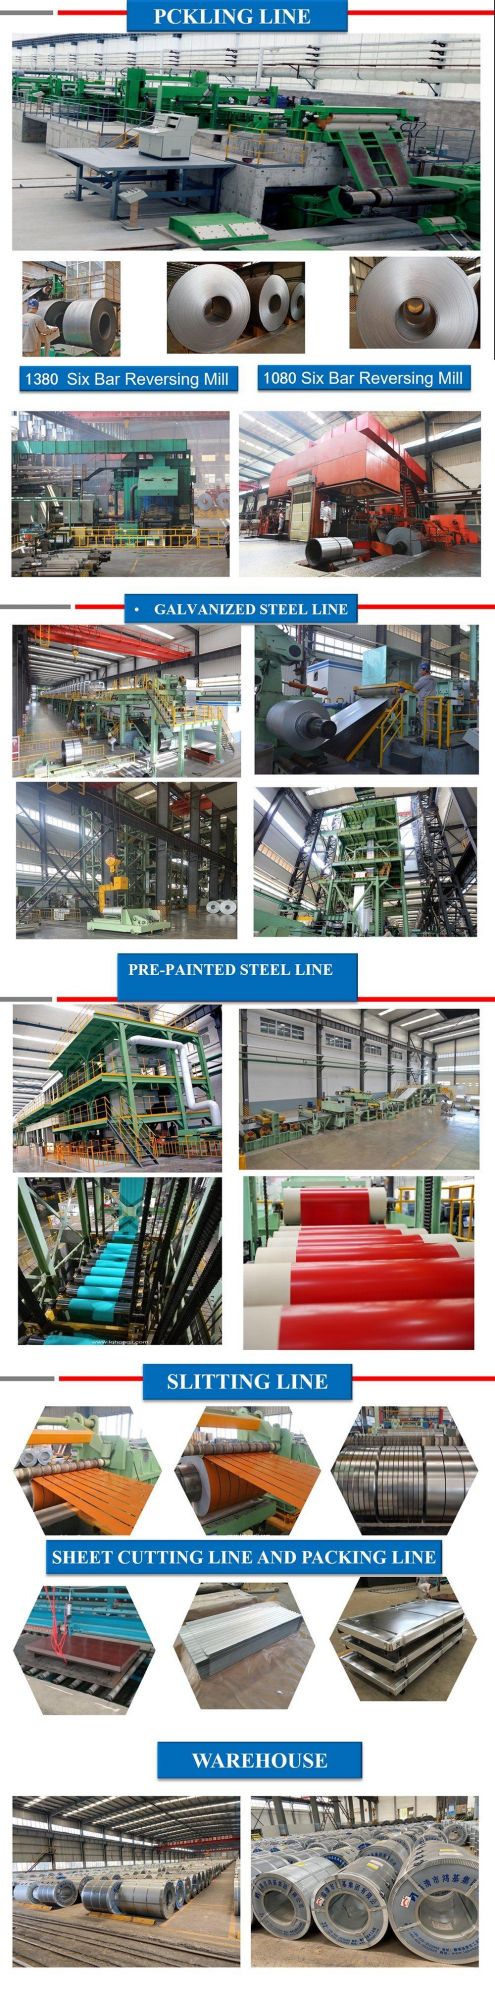 Hot Dipped Galvanized Steel Coil, Cold Rolled Steel Prices, Cold Rolled Steel Sheet Prices Prime